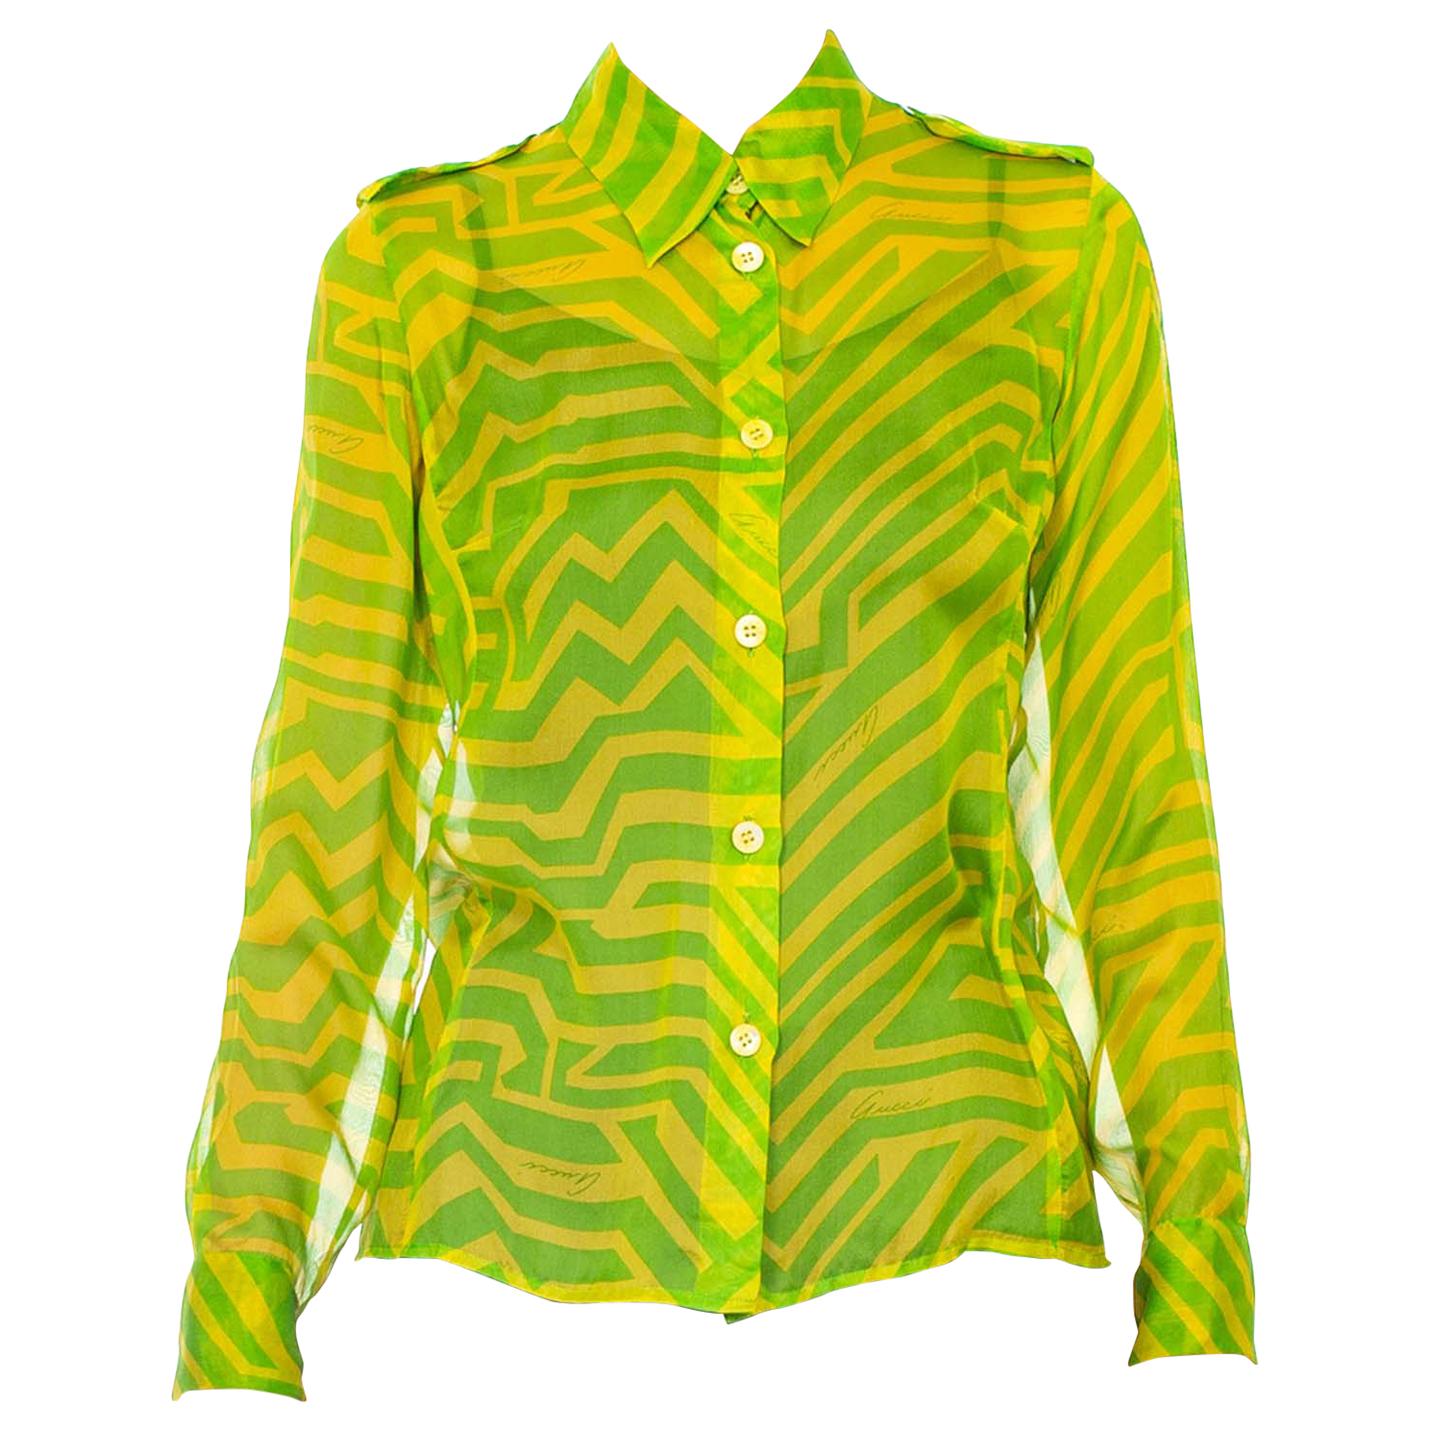 1990S TOM FORD GUCCI Lime Green Silk Chiffon Shirt From His First Collection For